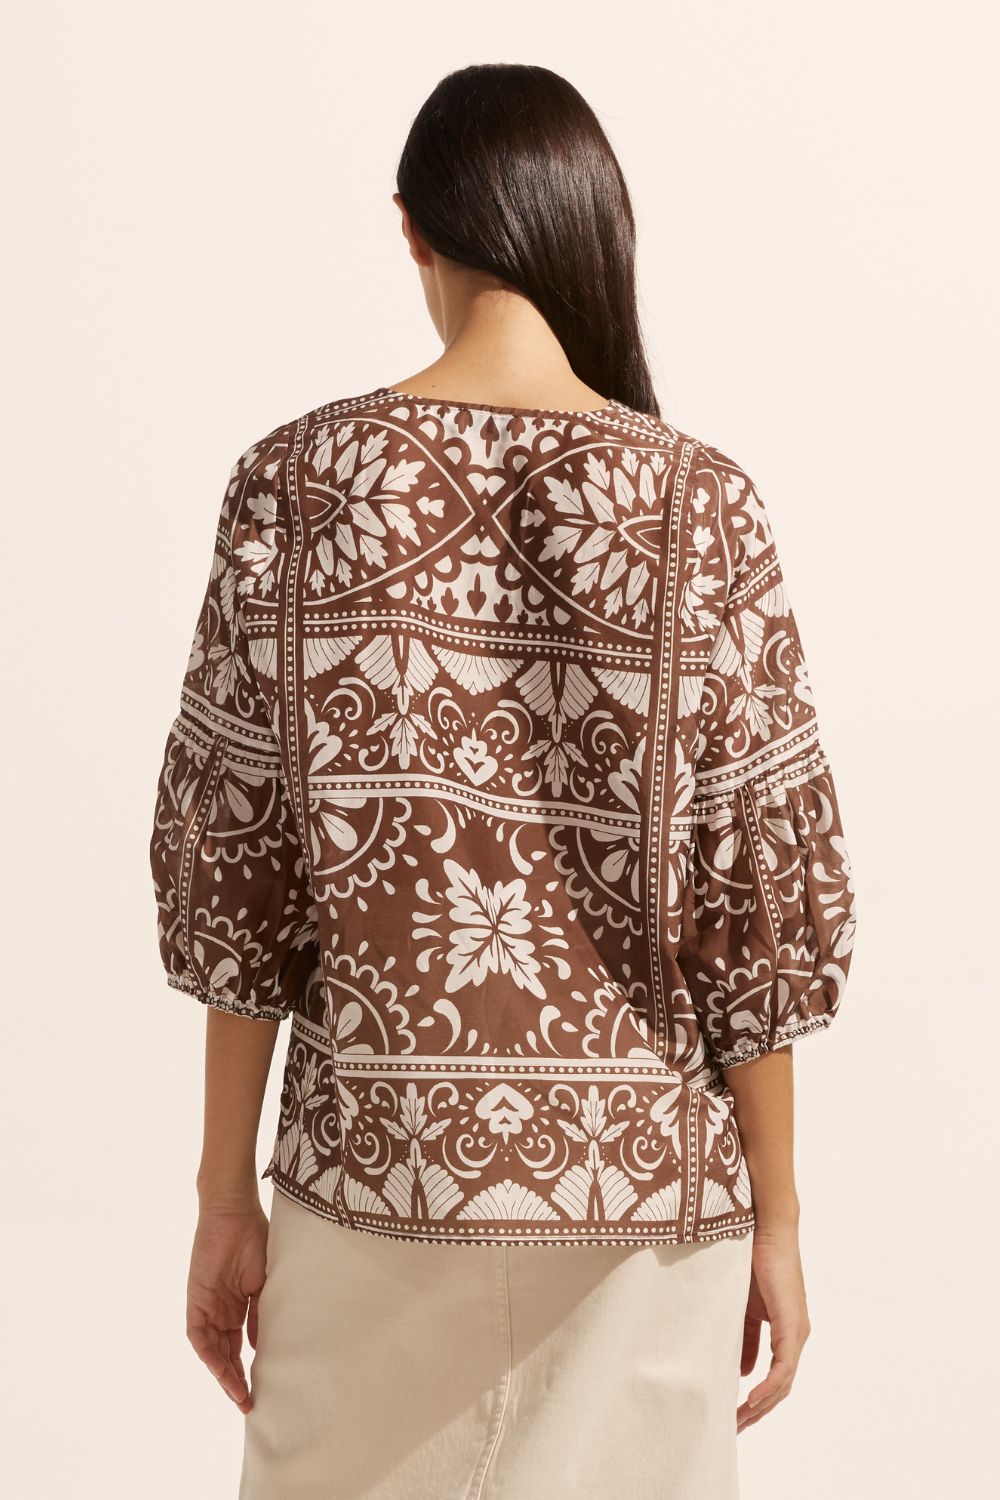 brown and white print, rounded neckline, mid length sleeve, back view